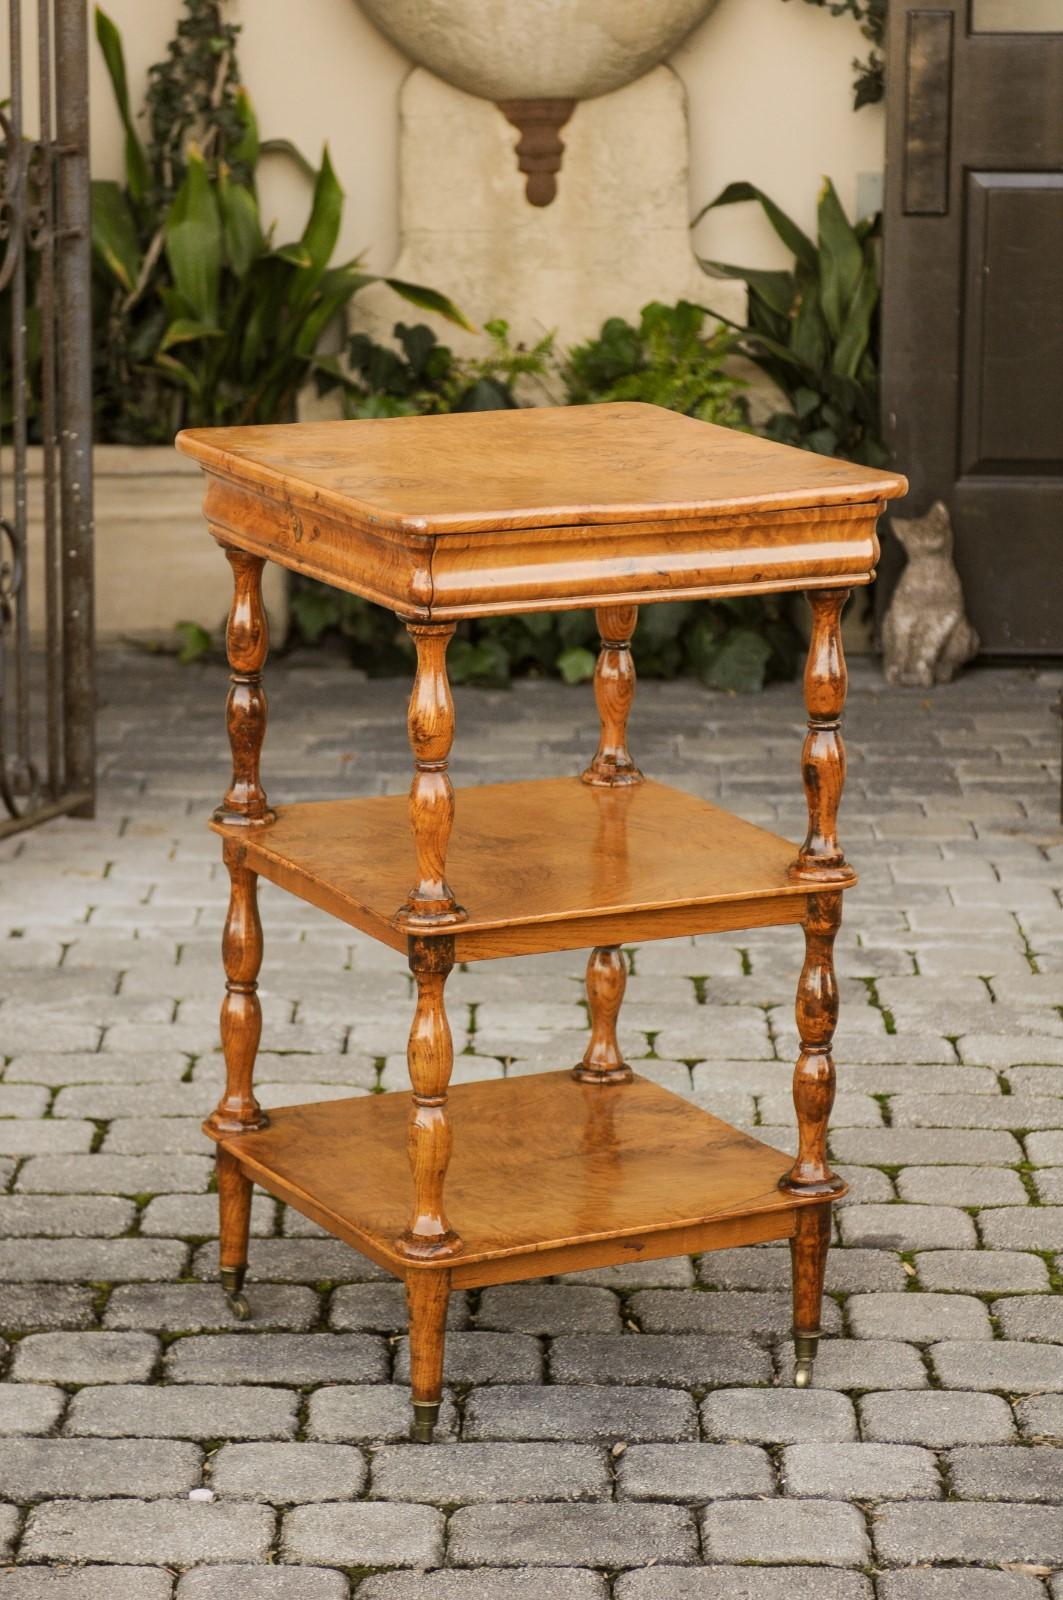 A French burl walnut tiered trolley from the late 19th century, with butterfly veneer, single drawer, turned legs and cavetto molding. Born in the third quarter of the 19th century at the end of the reign of Emperor Napoleon III, this tiered trolley